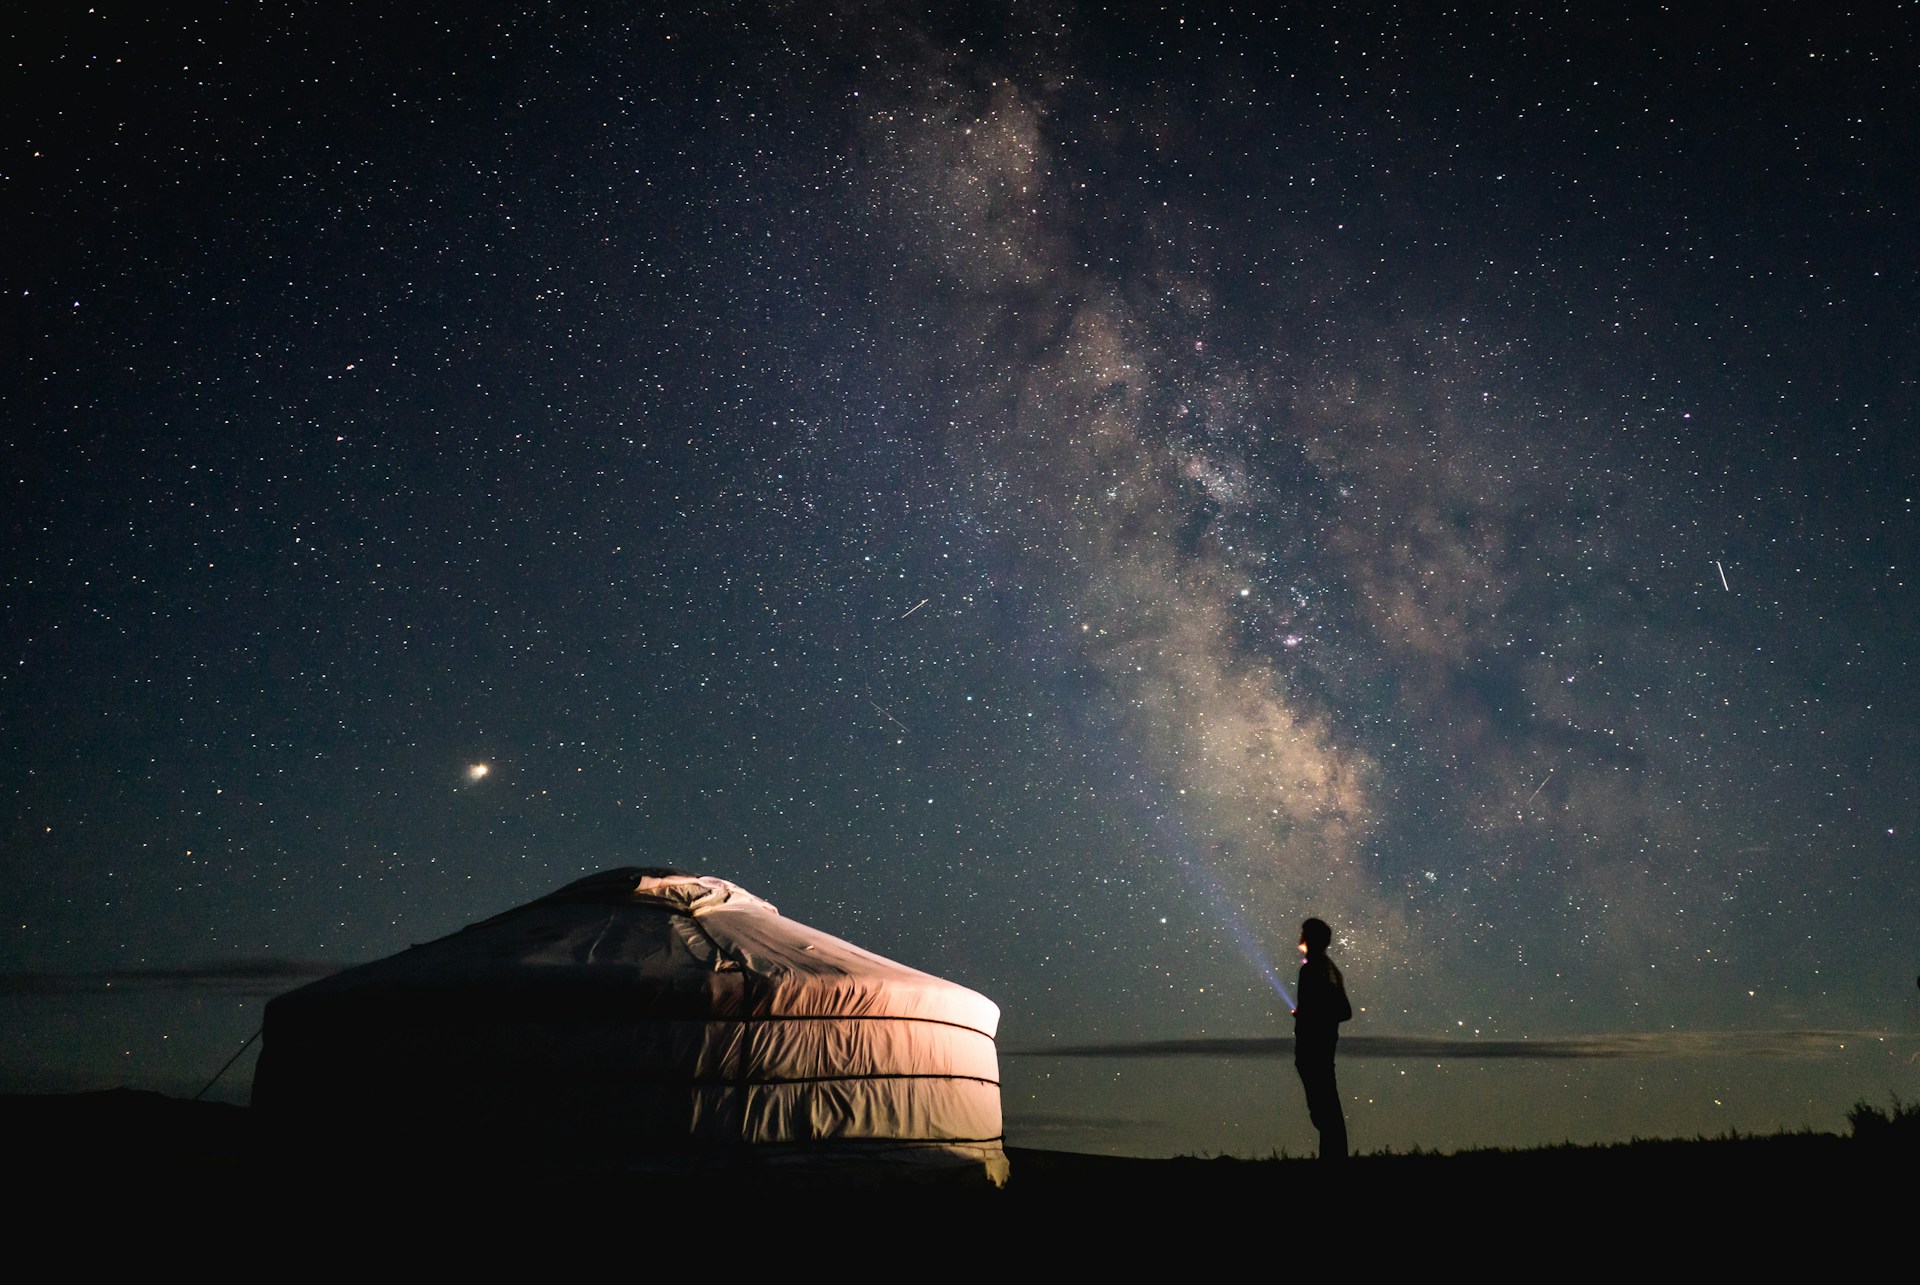 Image of camping outdoors in a yurt to convey benefits of digital nomad travel planning star gazing - Odyssey App